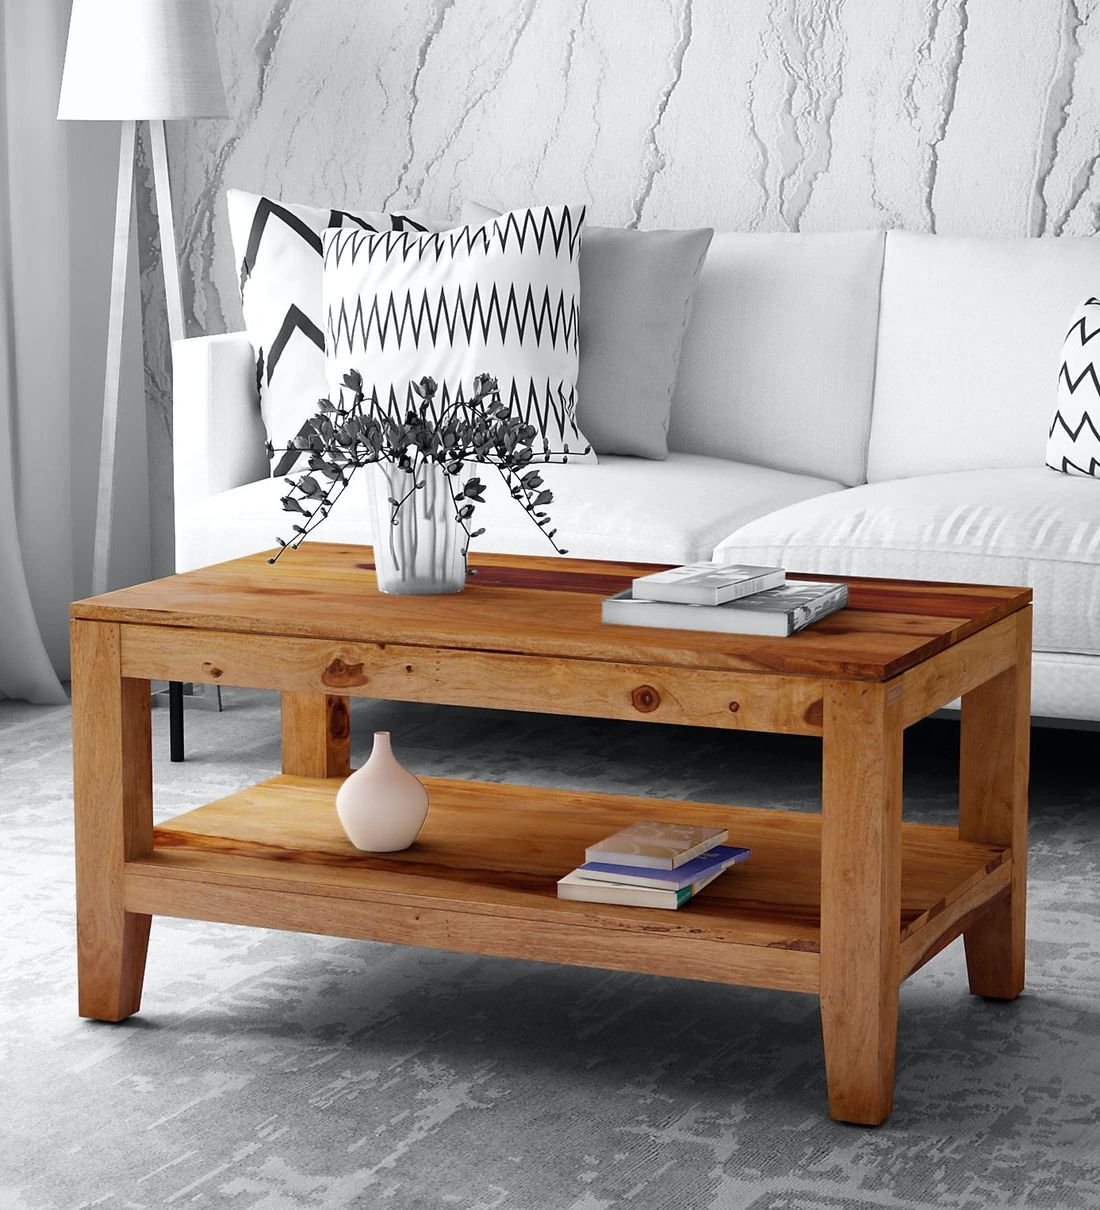 Wood Coffee Tables Intended For Well Known Buy Anitz Solid Wood Coffee Table In Warm Walnut Finish (View 4 of 20)